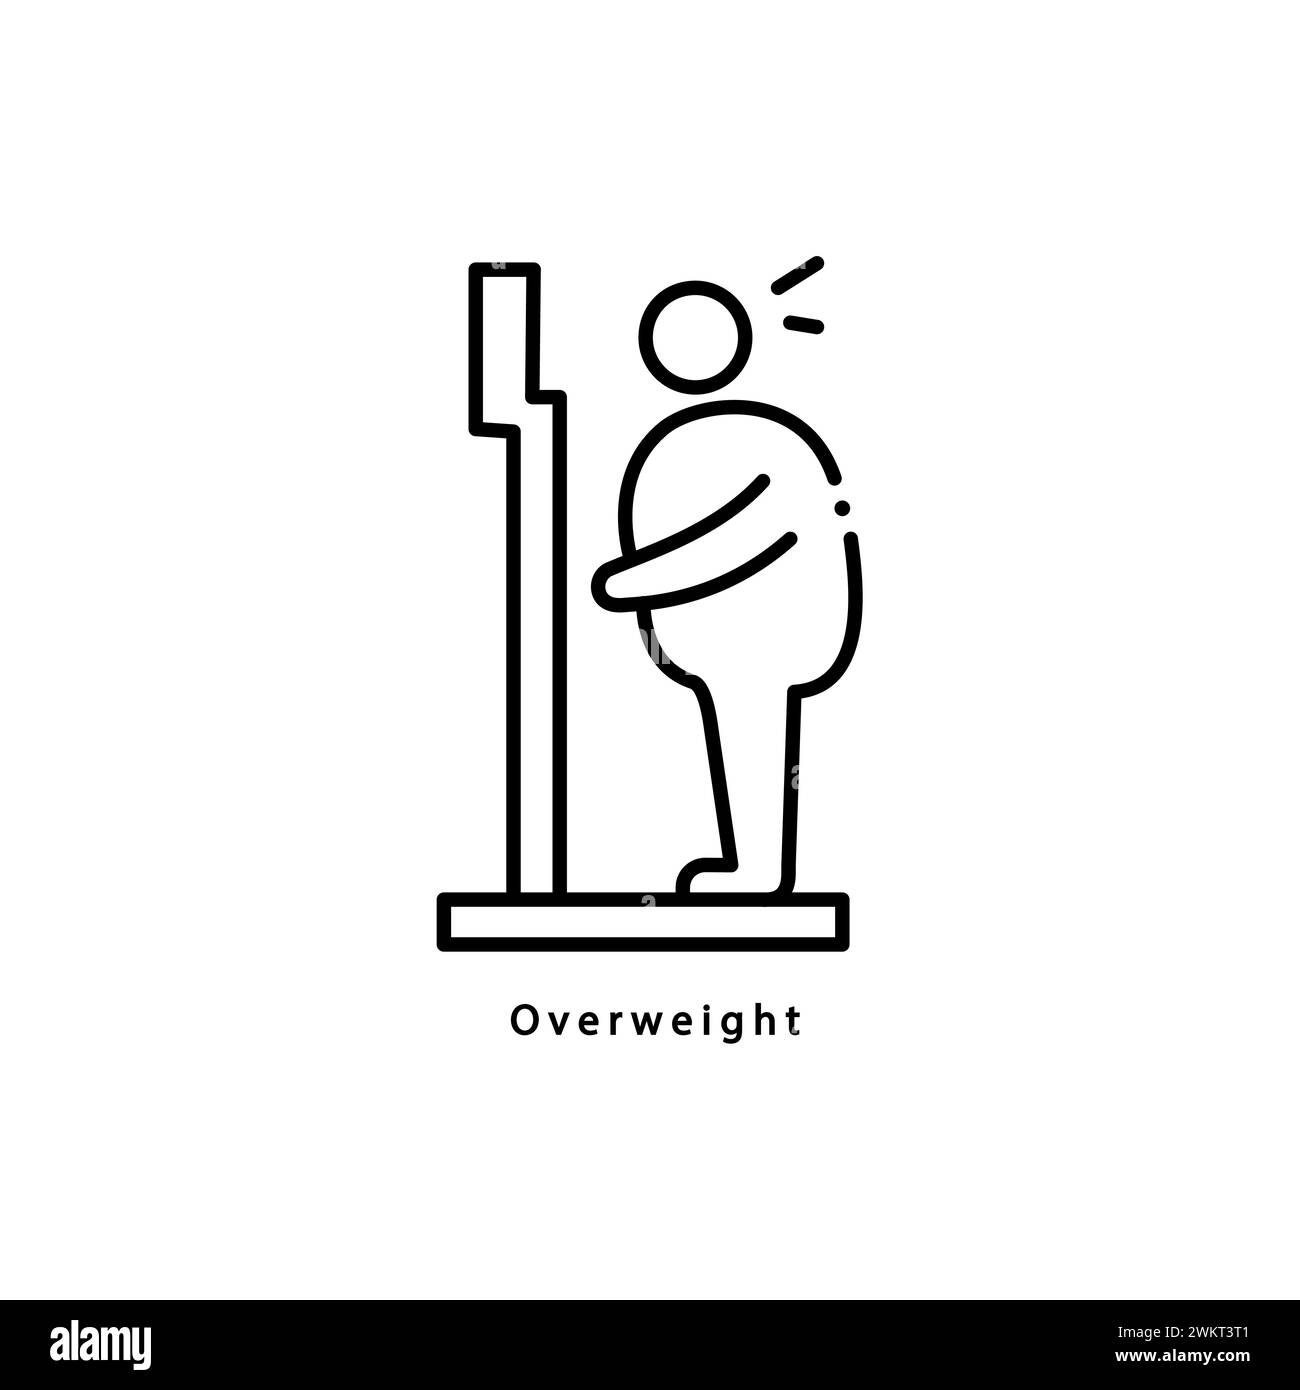 Overweight icon, obese problem, big weight, fat body man, unhealthy figure, thin line symbol - editable stroke vector illustration Stock Vector